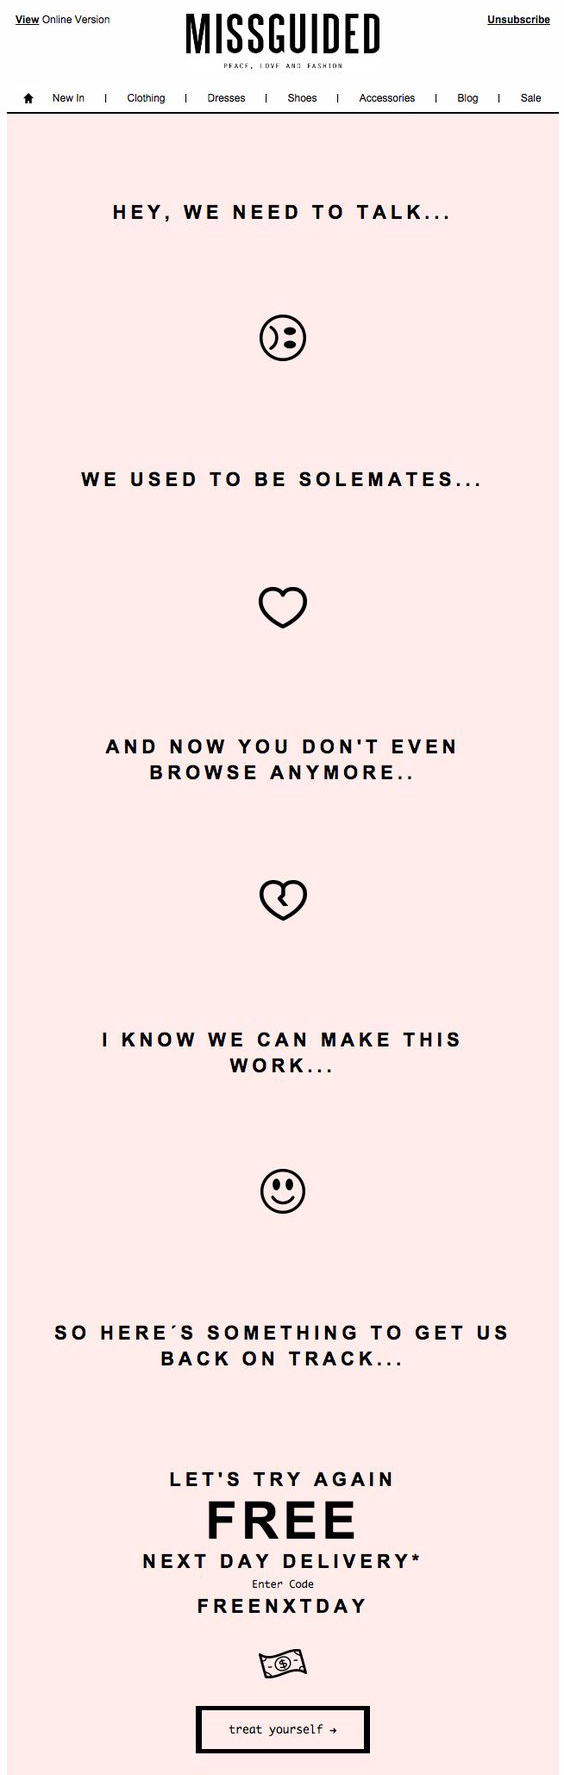 A retention email campaign from Missguided.